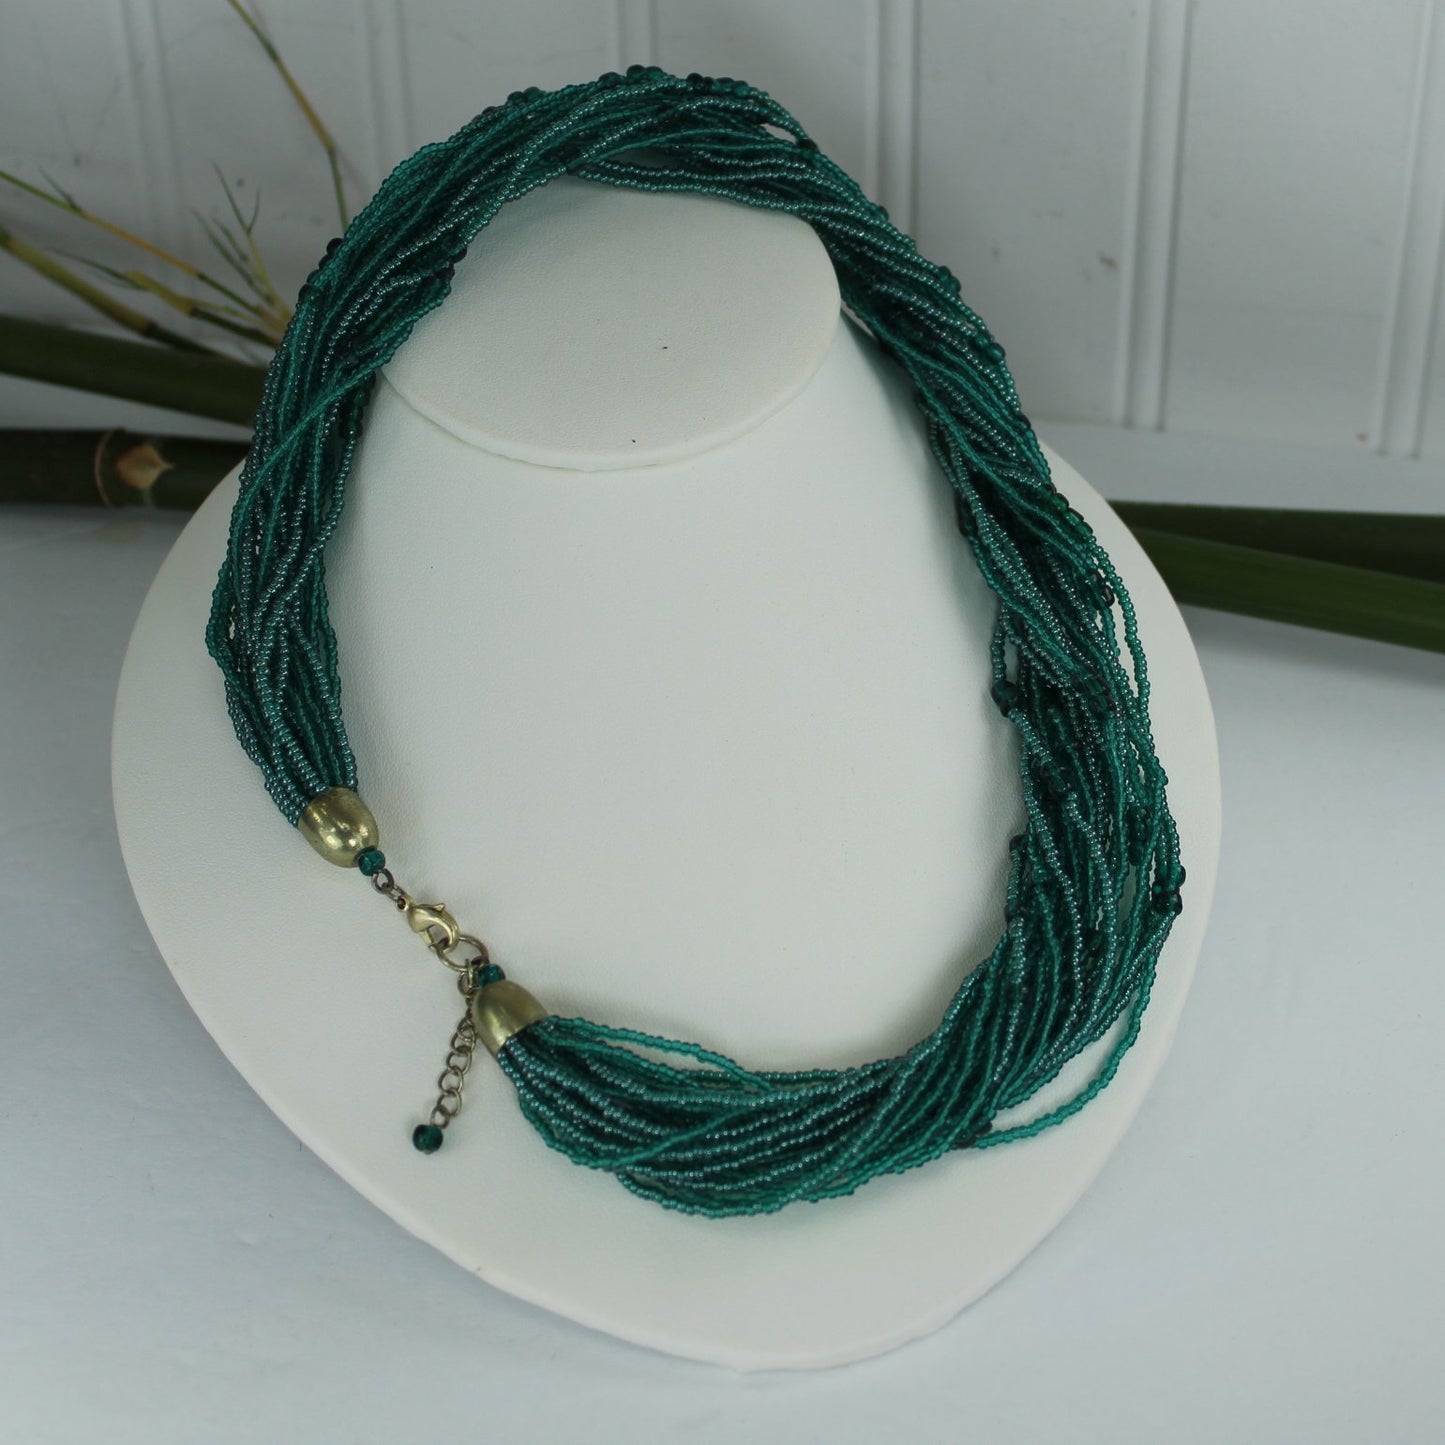 Stunning Teal Iridescent Necklace 24 Strand Tiny Glass Beads close lobster closure